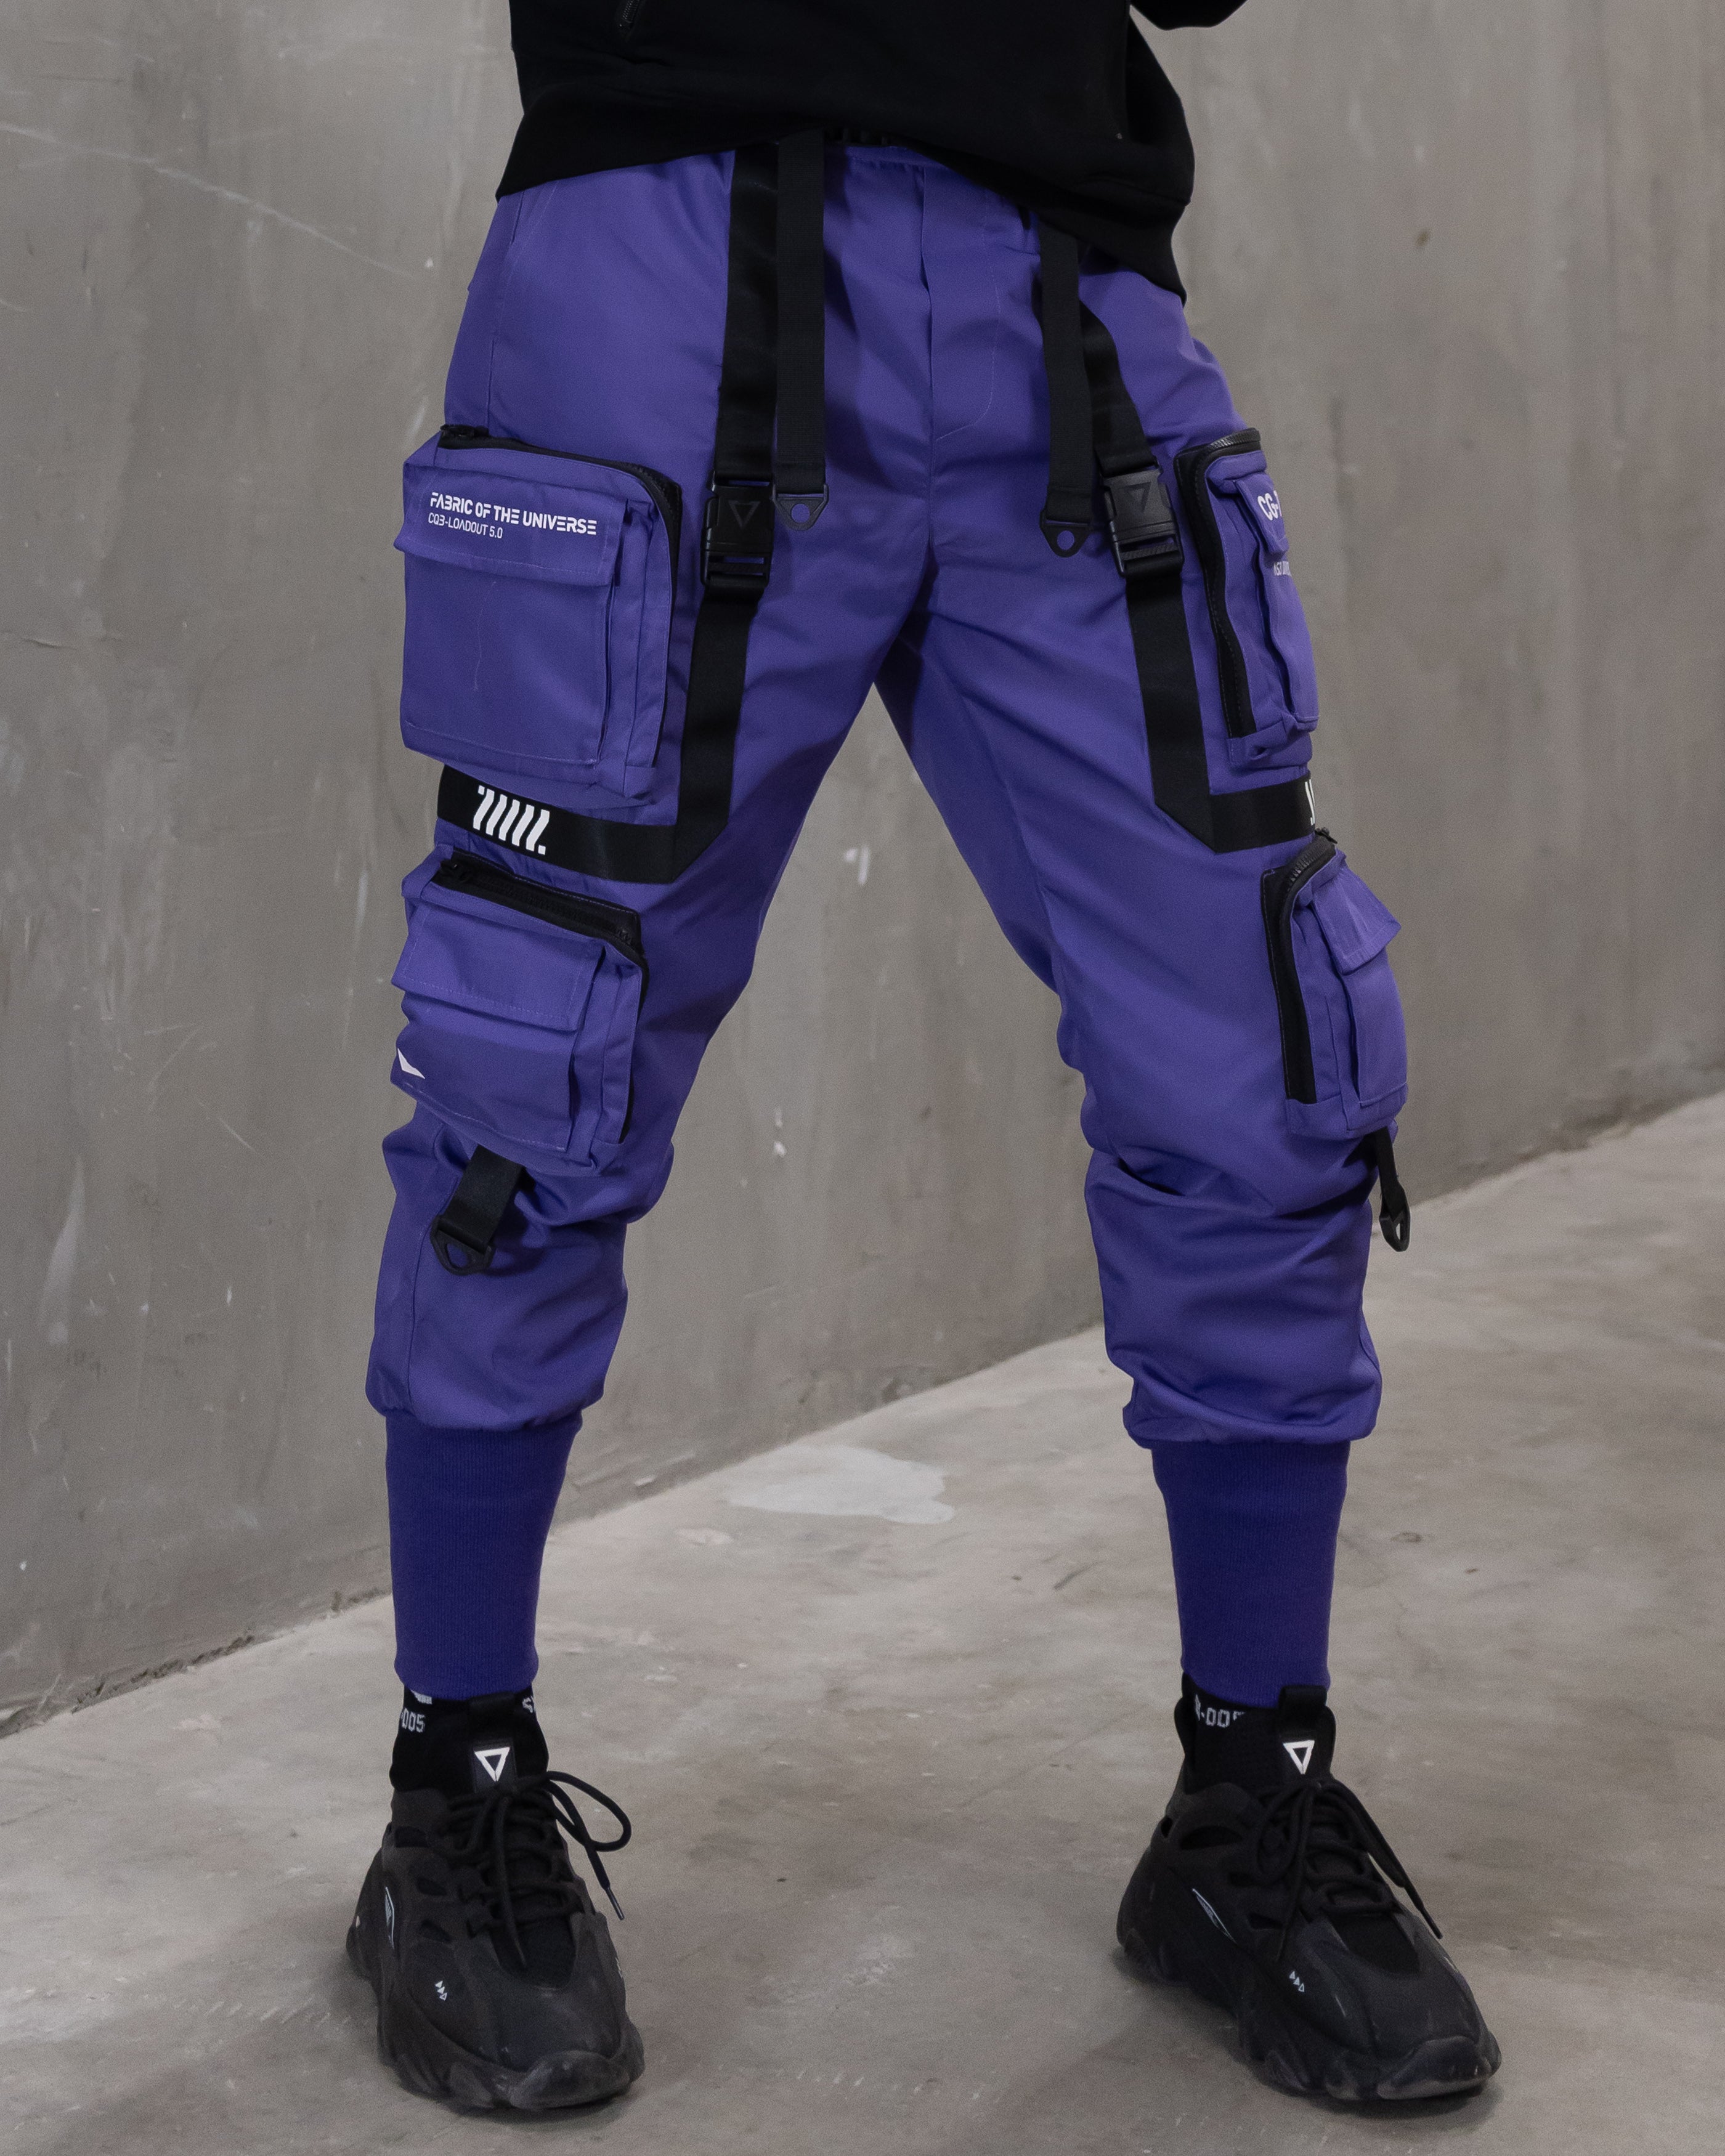 CG-Type 11R(U) Violet Cargo Pants - Fabric of the Universe